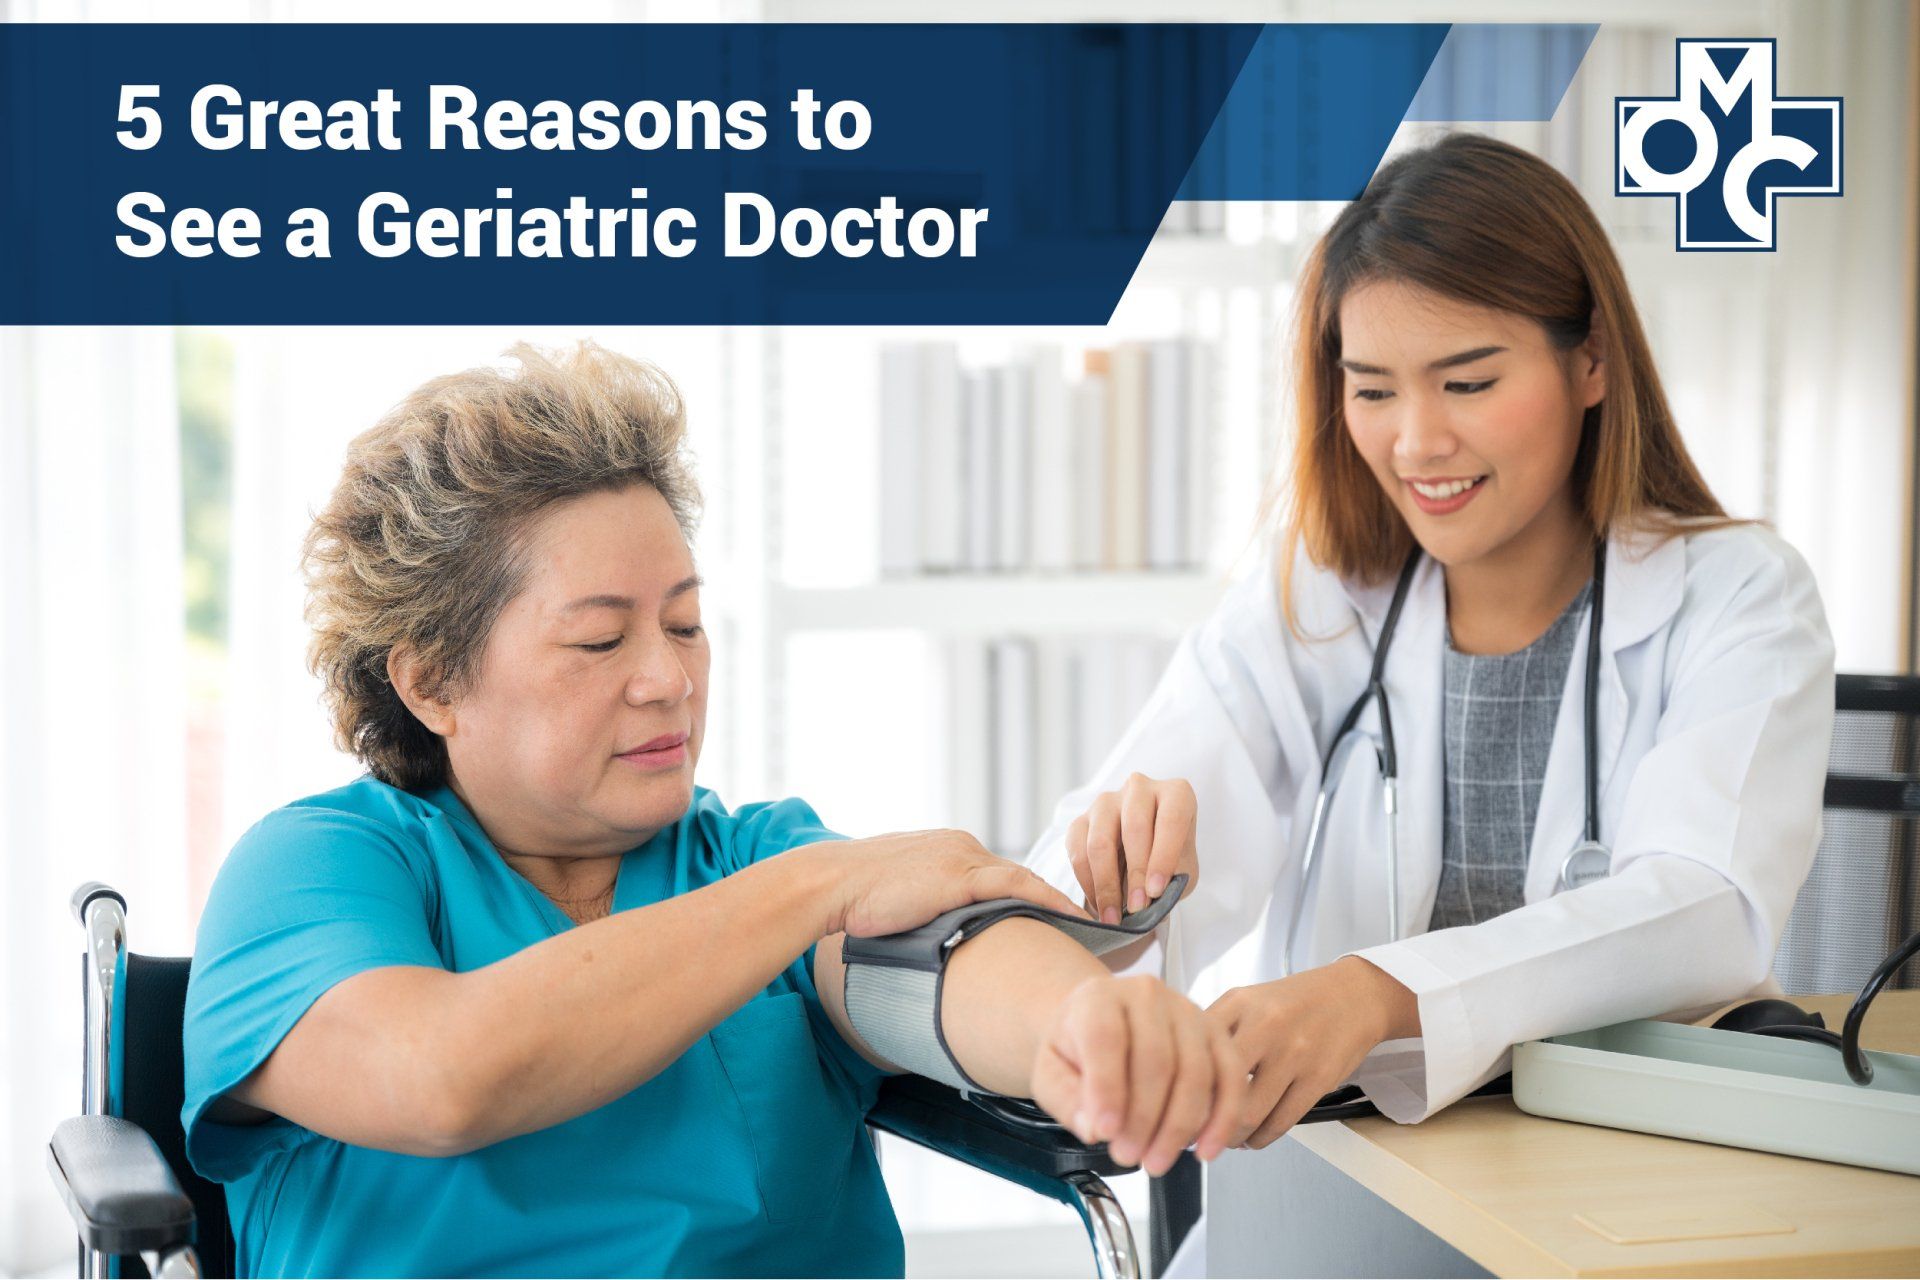 5 Great Reasons to See a Geriatric Doctor